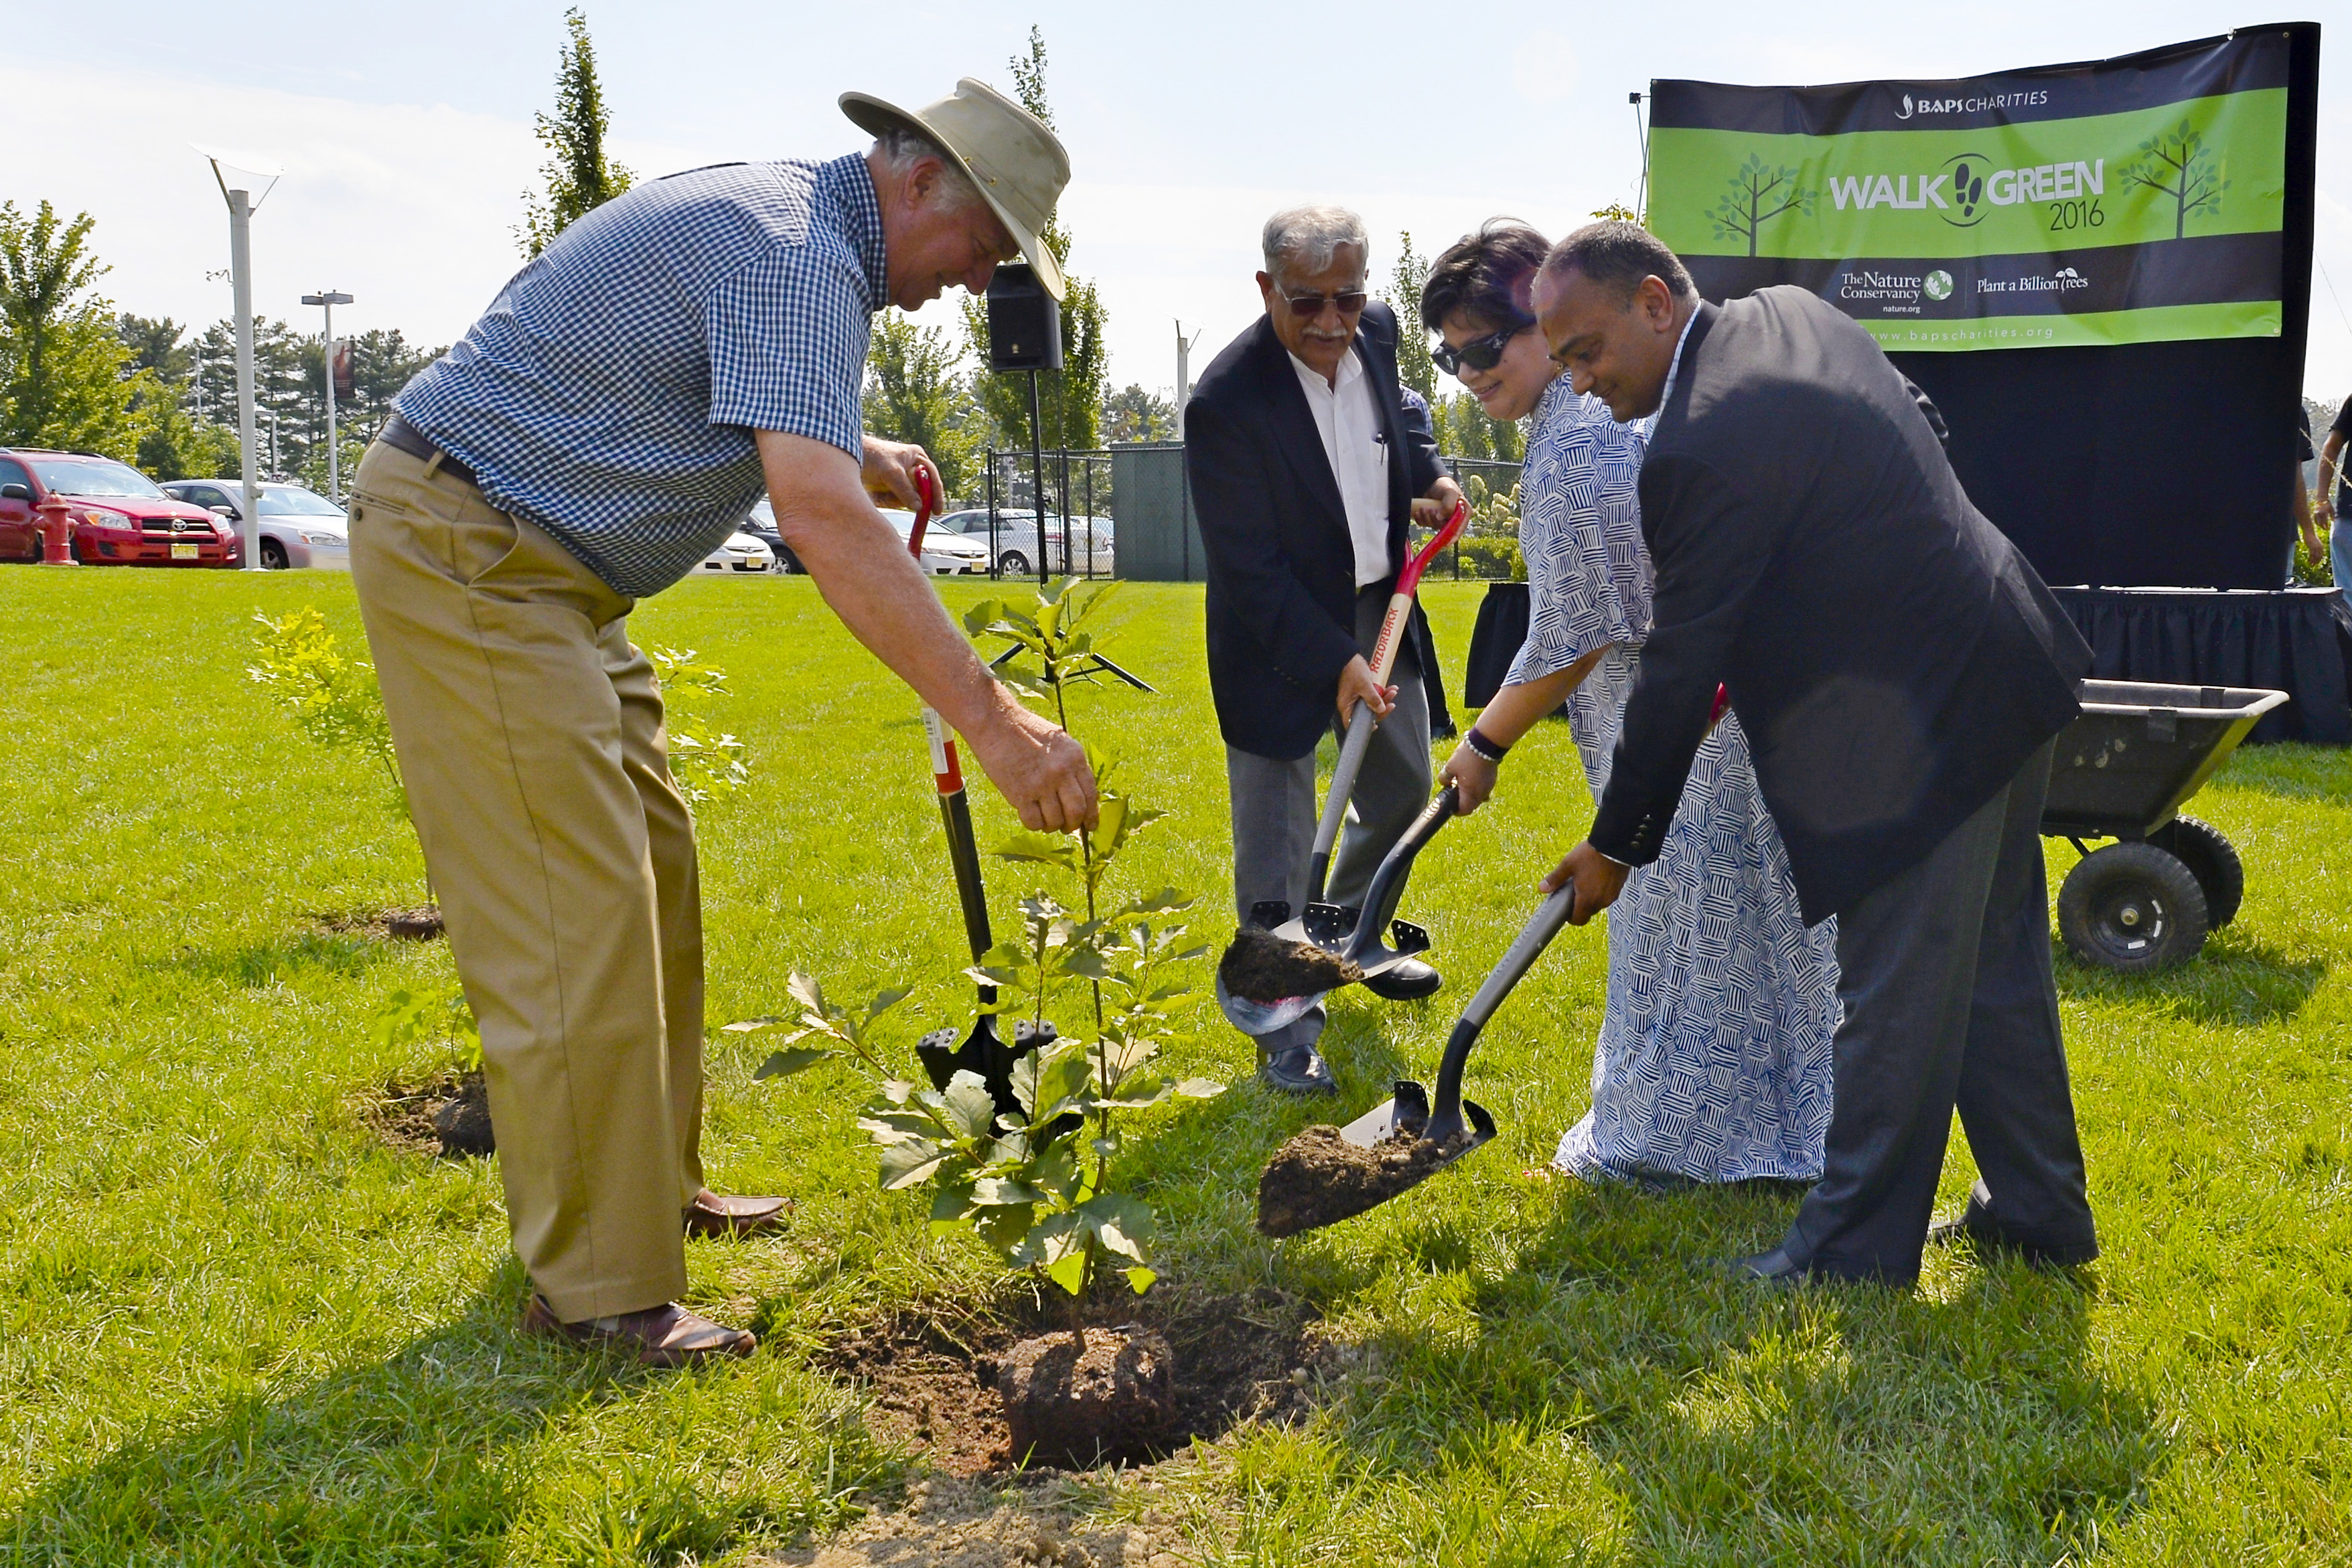 Arbor Day Foundation planted more than 500,000 trees in the United States in 2022